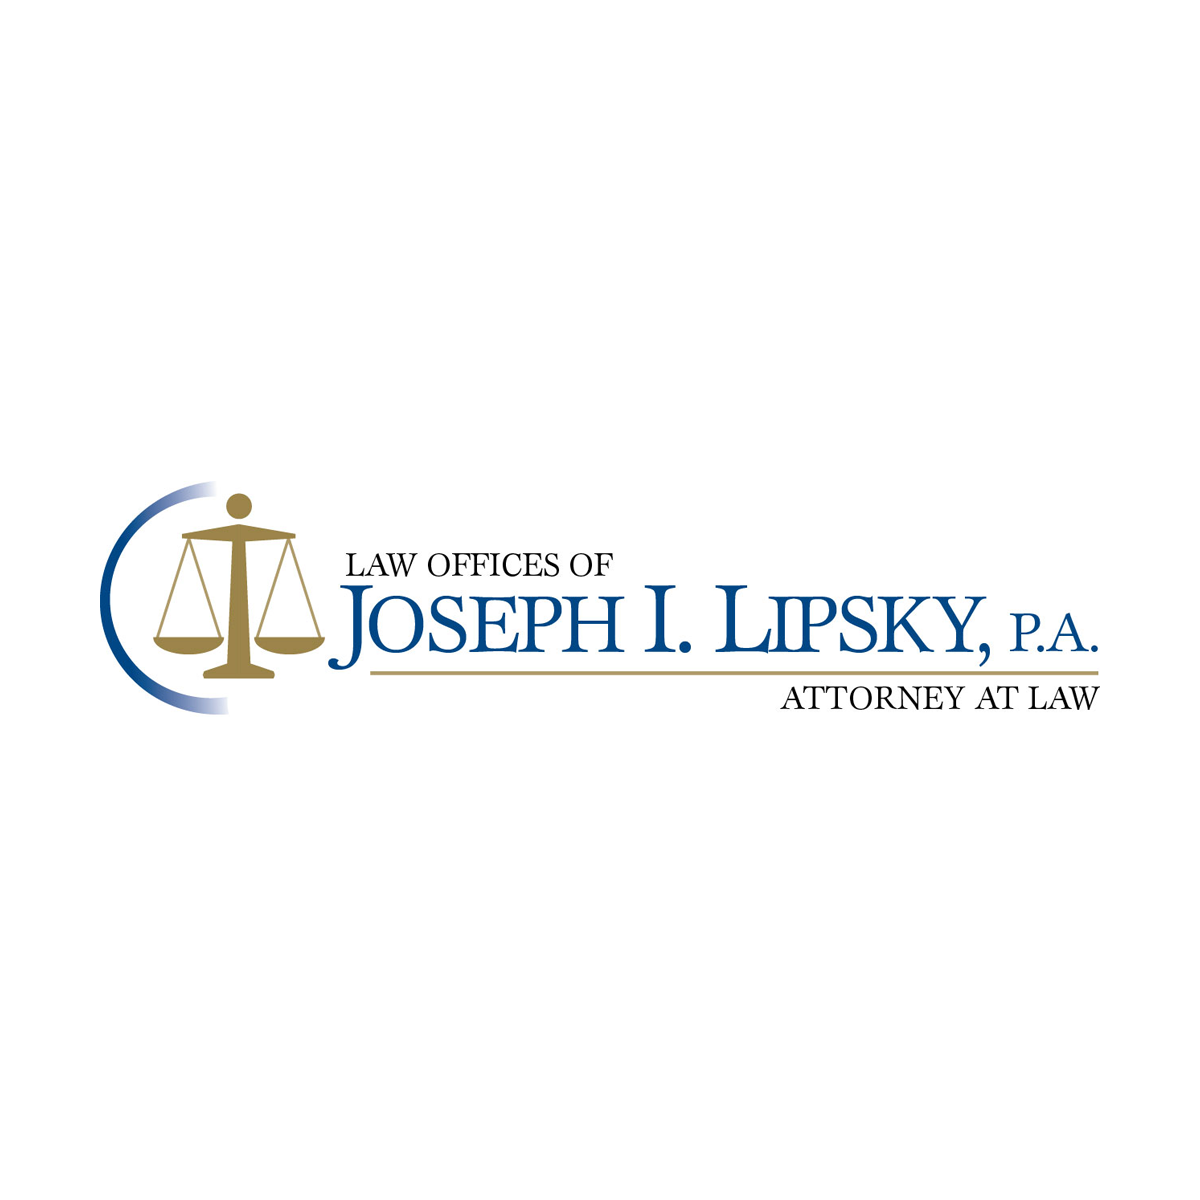 Deadly Car Accidents Rose to All-Time High in 2021 — Florida Personal Injury Lawyer Blog — February 7, 2022